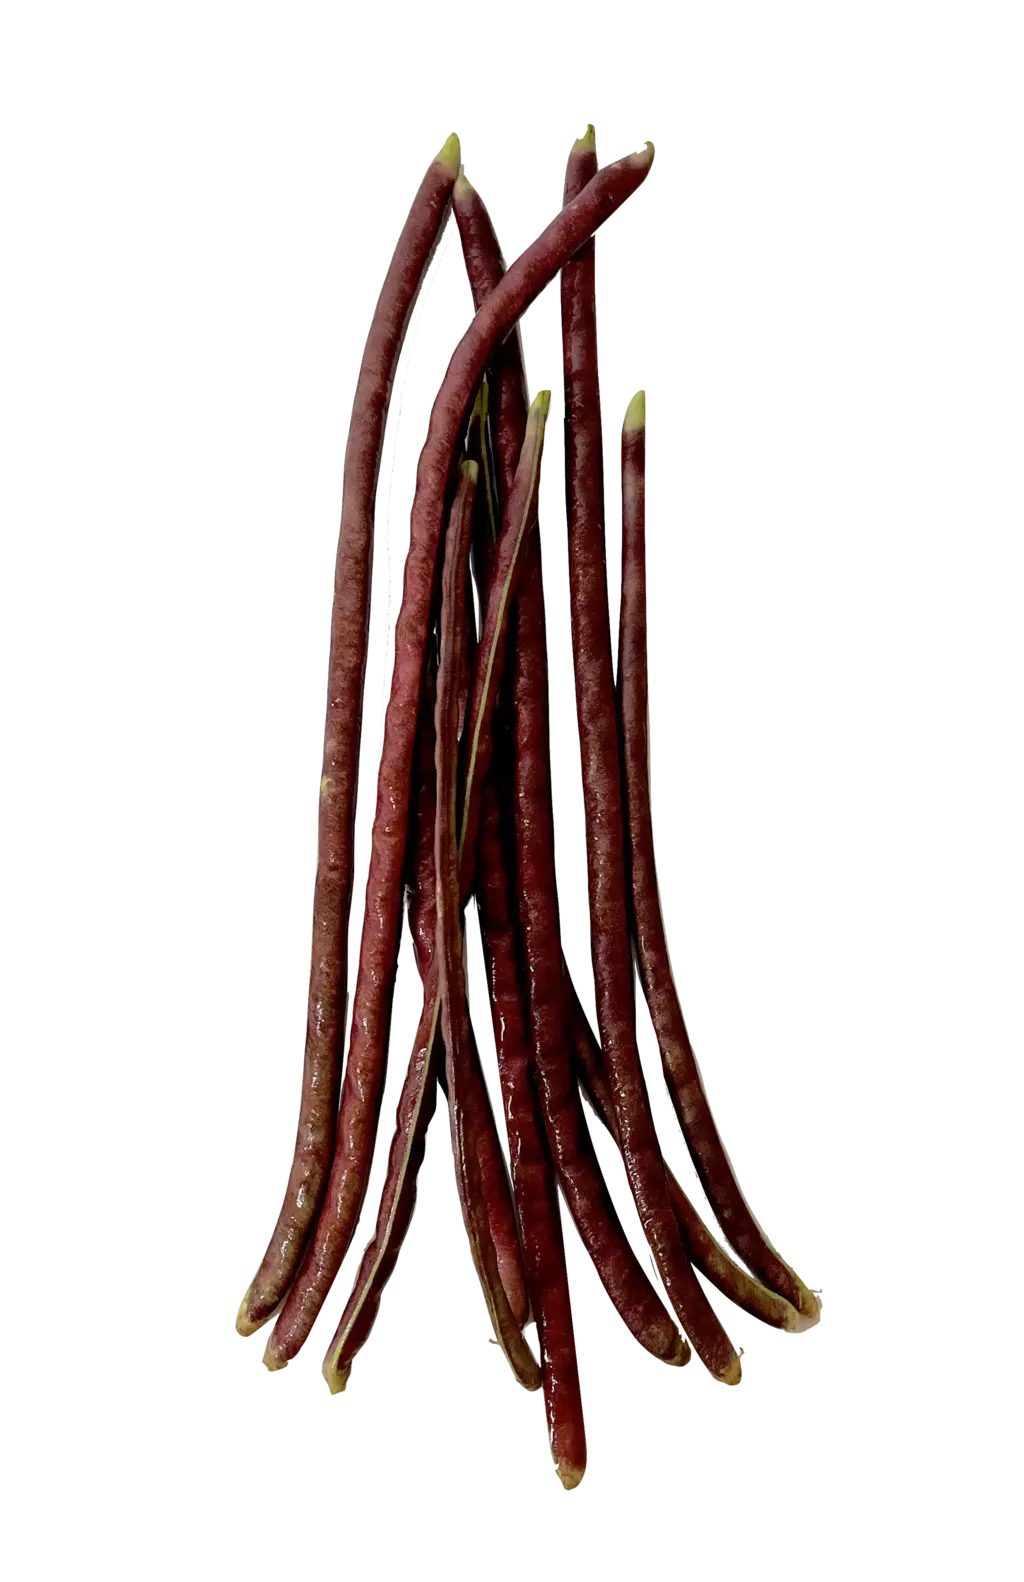 Long Beans red 400g Morocco